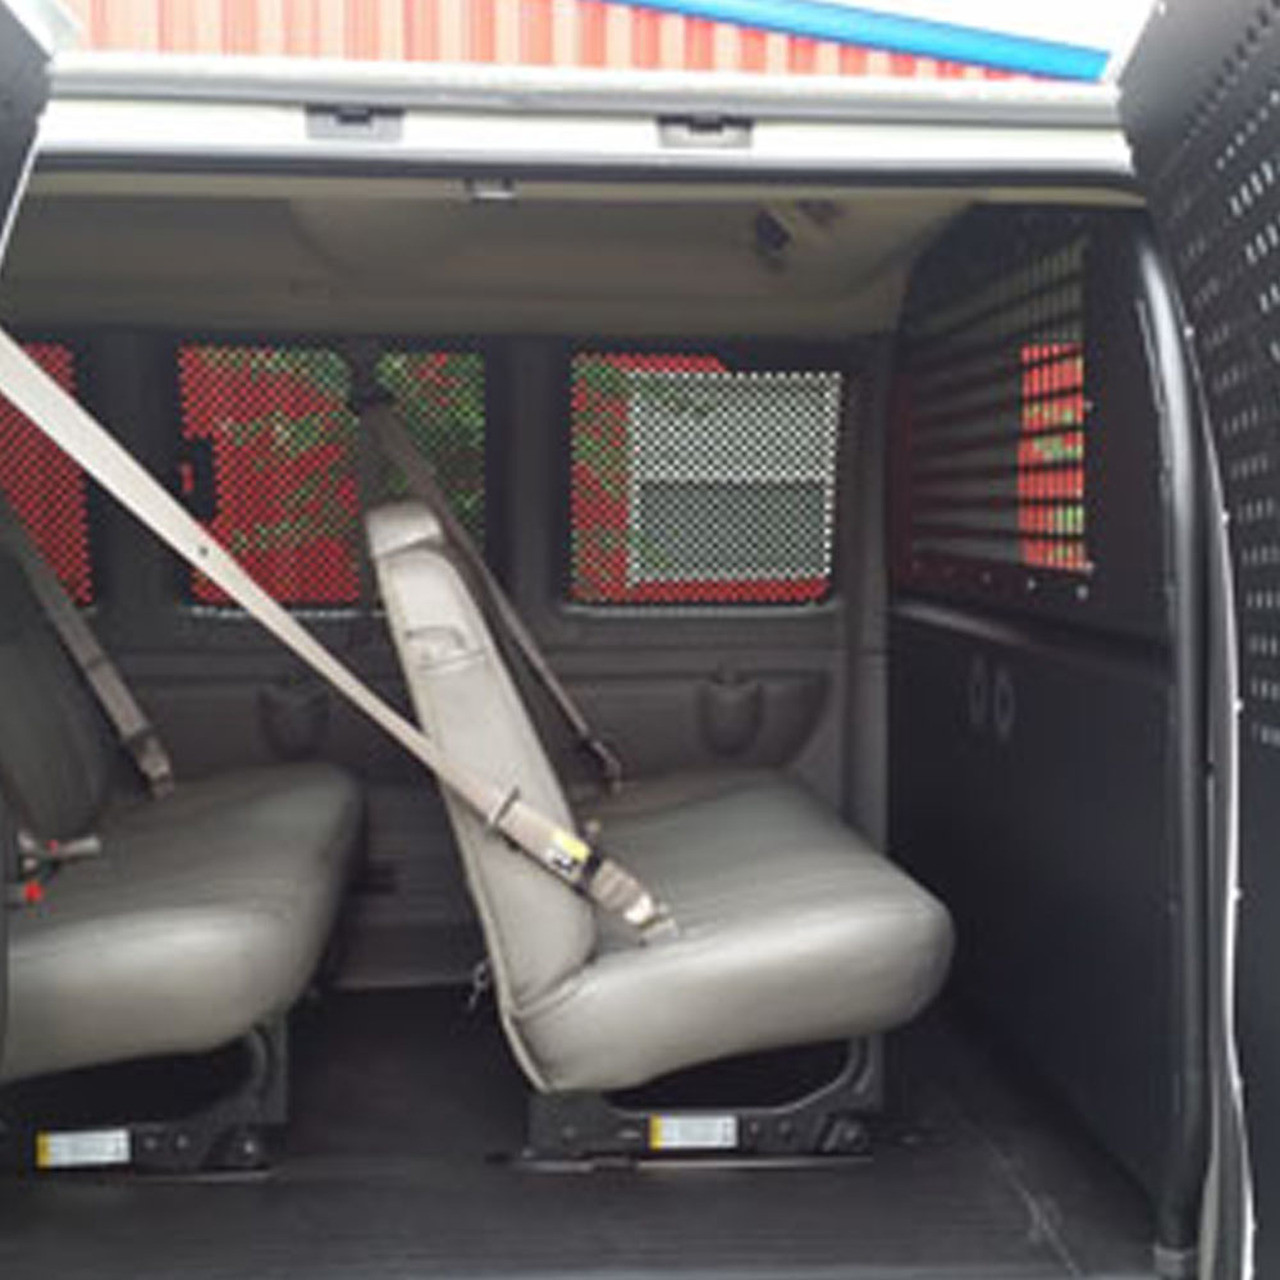 American Aluminum Chevy Express Van Inmate Transport Kit, includes Window Screen Systems, Door Panels, Front Partition, Mounting Hardware